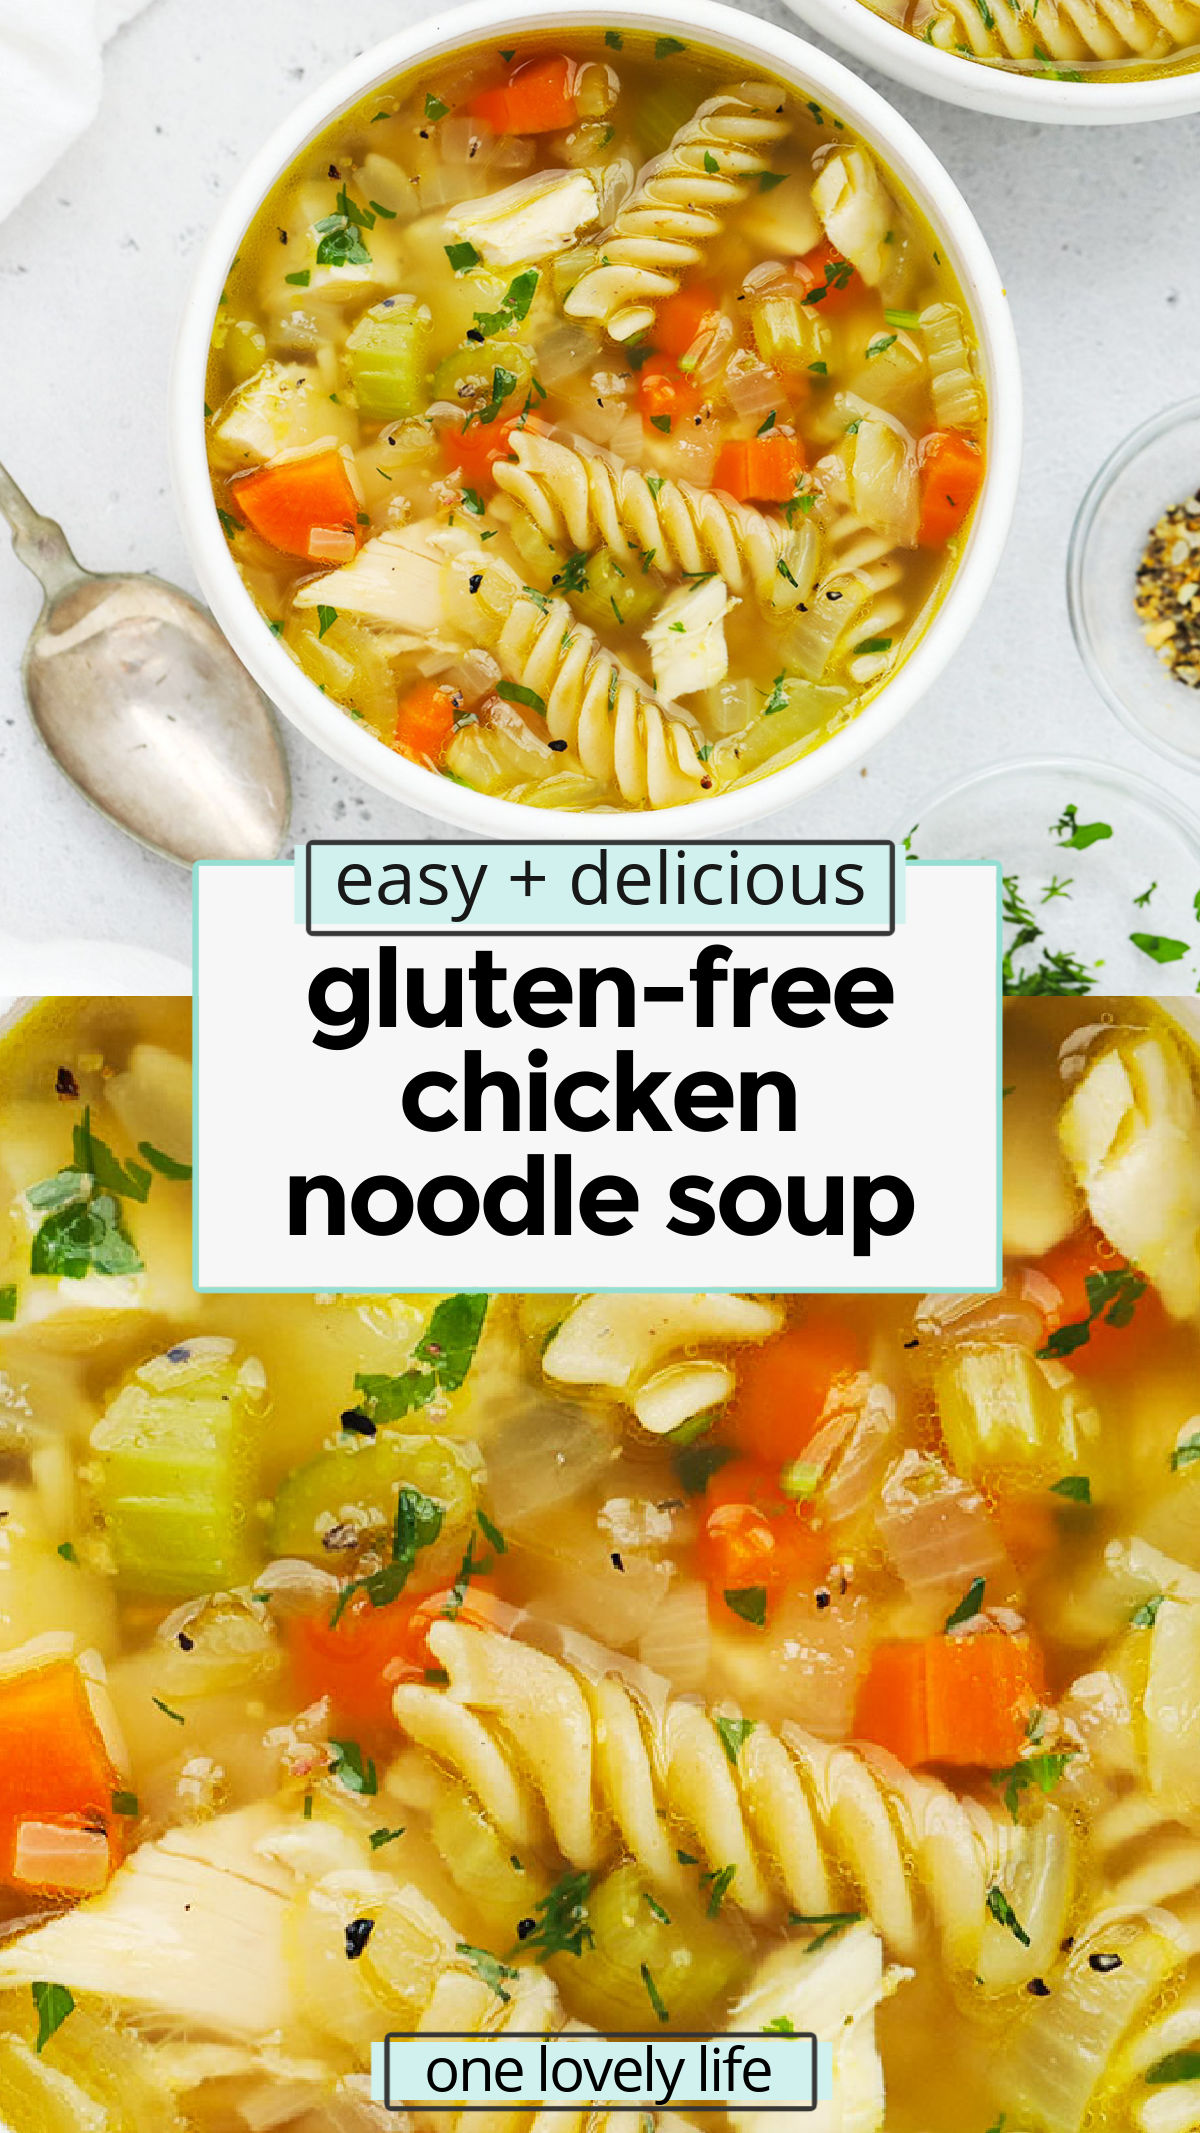 Gluten-Free Chicken Noodle Soup - This easy gluten-free chicken soup recipe is full of flavor, made from simple ingredients & tastes so cozy! (Dairy-free) // gluten-free chicken noodle soup recipe / the best gluten-free chicken noodle soup recipe / gluten-free soup recipe / gluten-free noodle soup recipe / healthy chicken noodle soup / homemade chicken noodle soup / homemade gluten-free chicken noodle soup from scratch